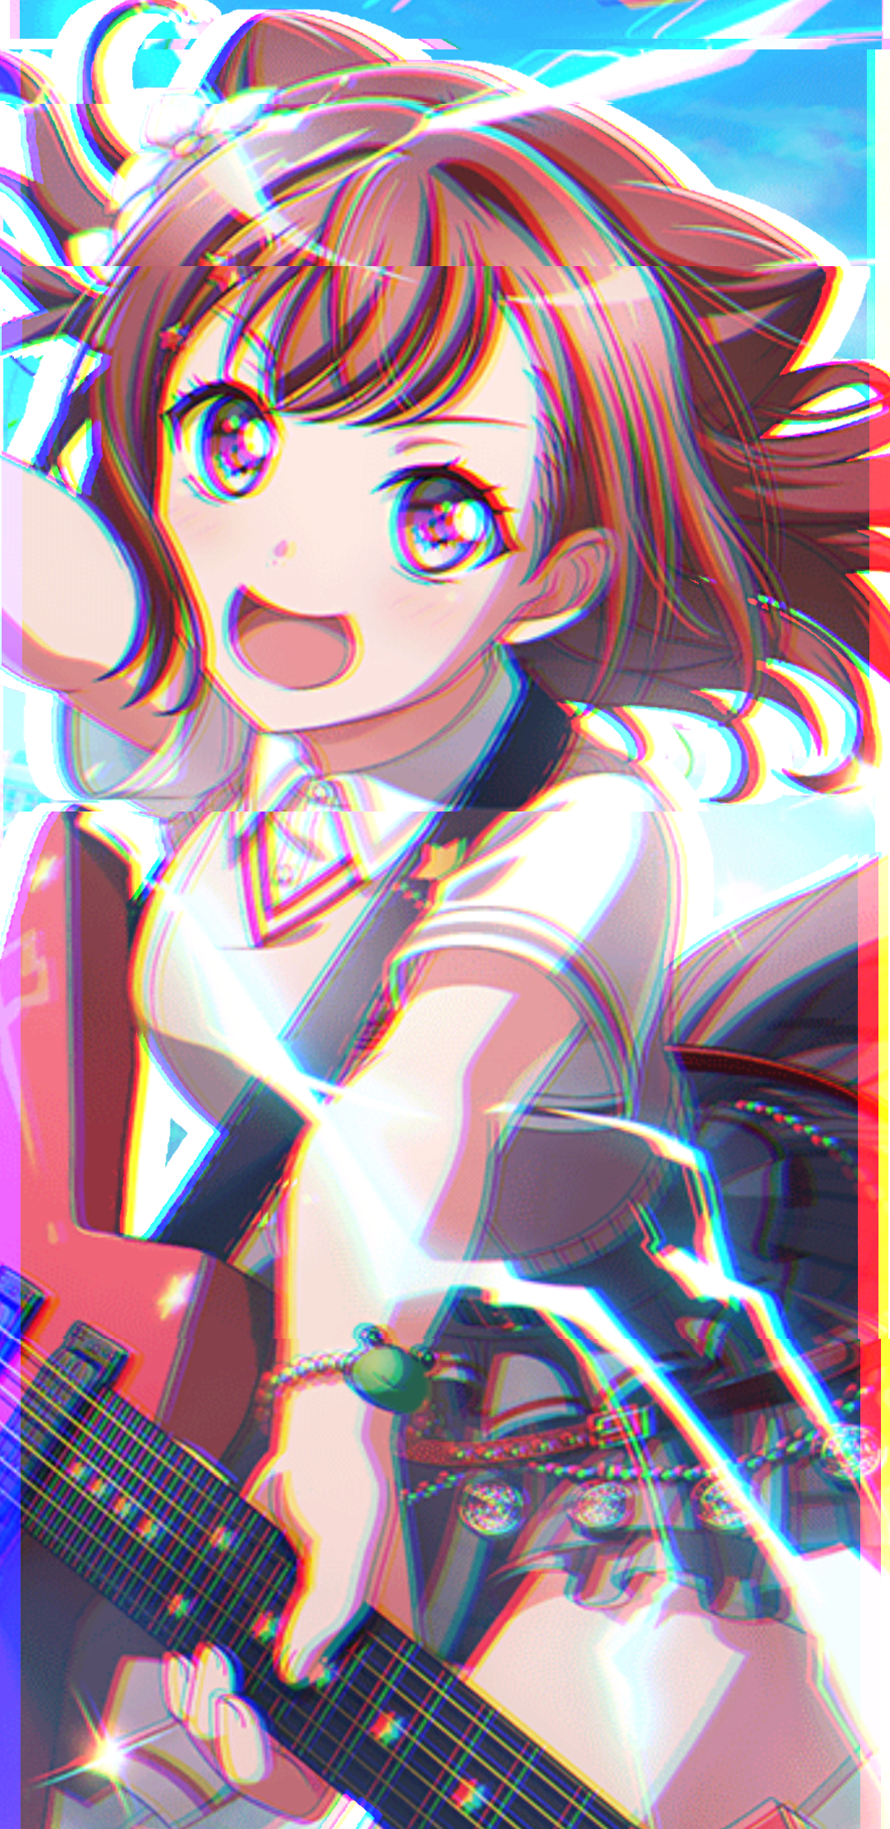 sorry for not posting in a while but happy birthday kasumi! here's an edit i made of her railgun...